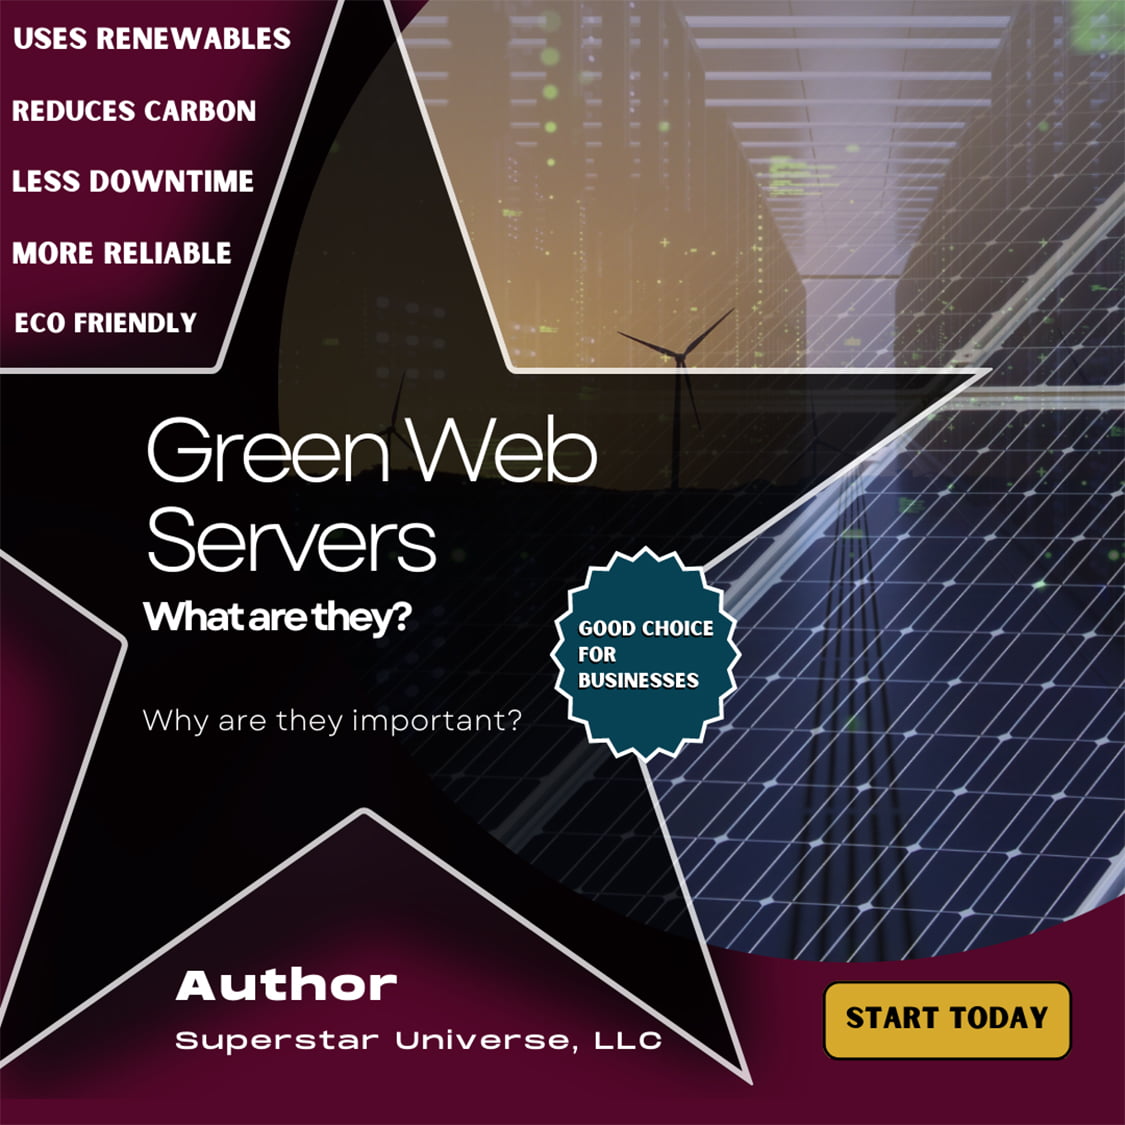 What are Green Web Servers and Why Are They Important by Superstar Universe, LLC